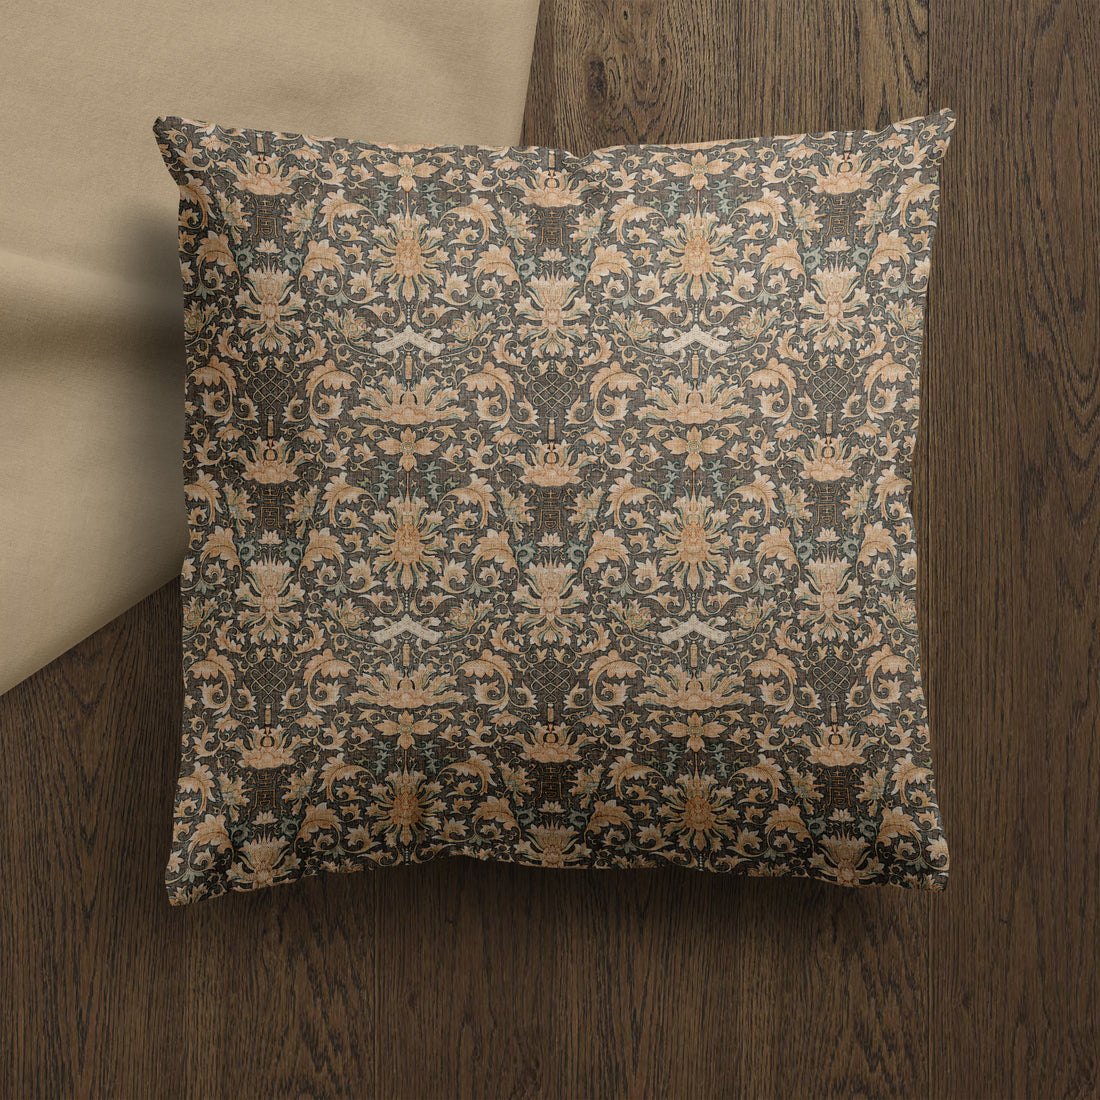 Delicate Damask II Vintage Pillow Cover